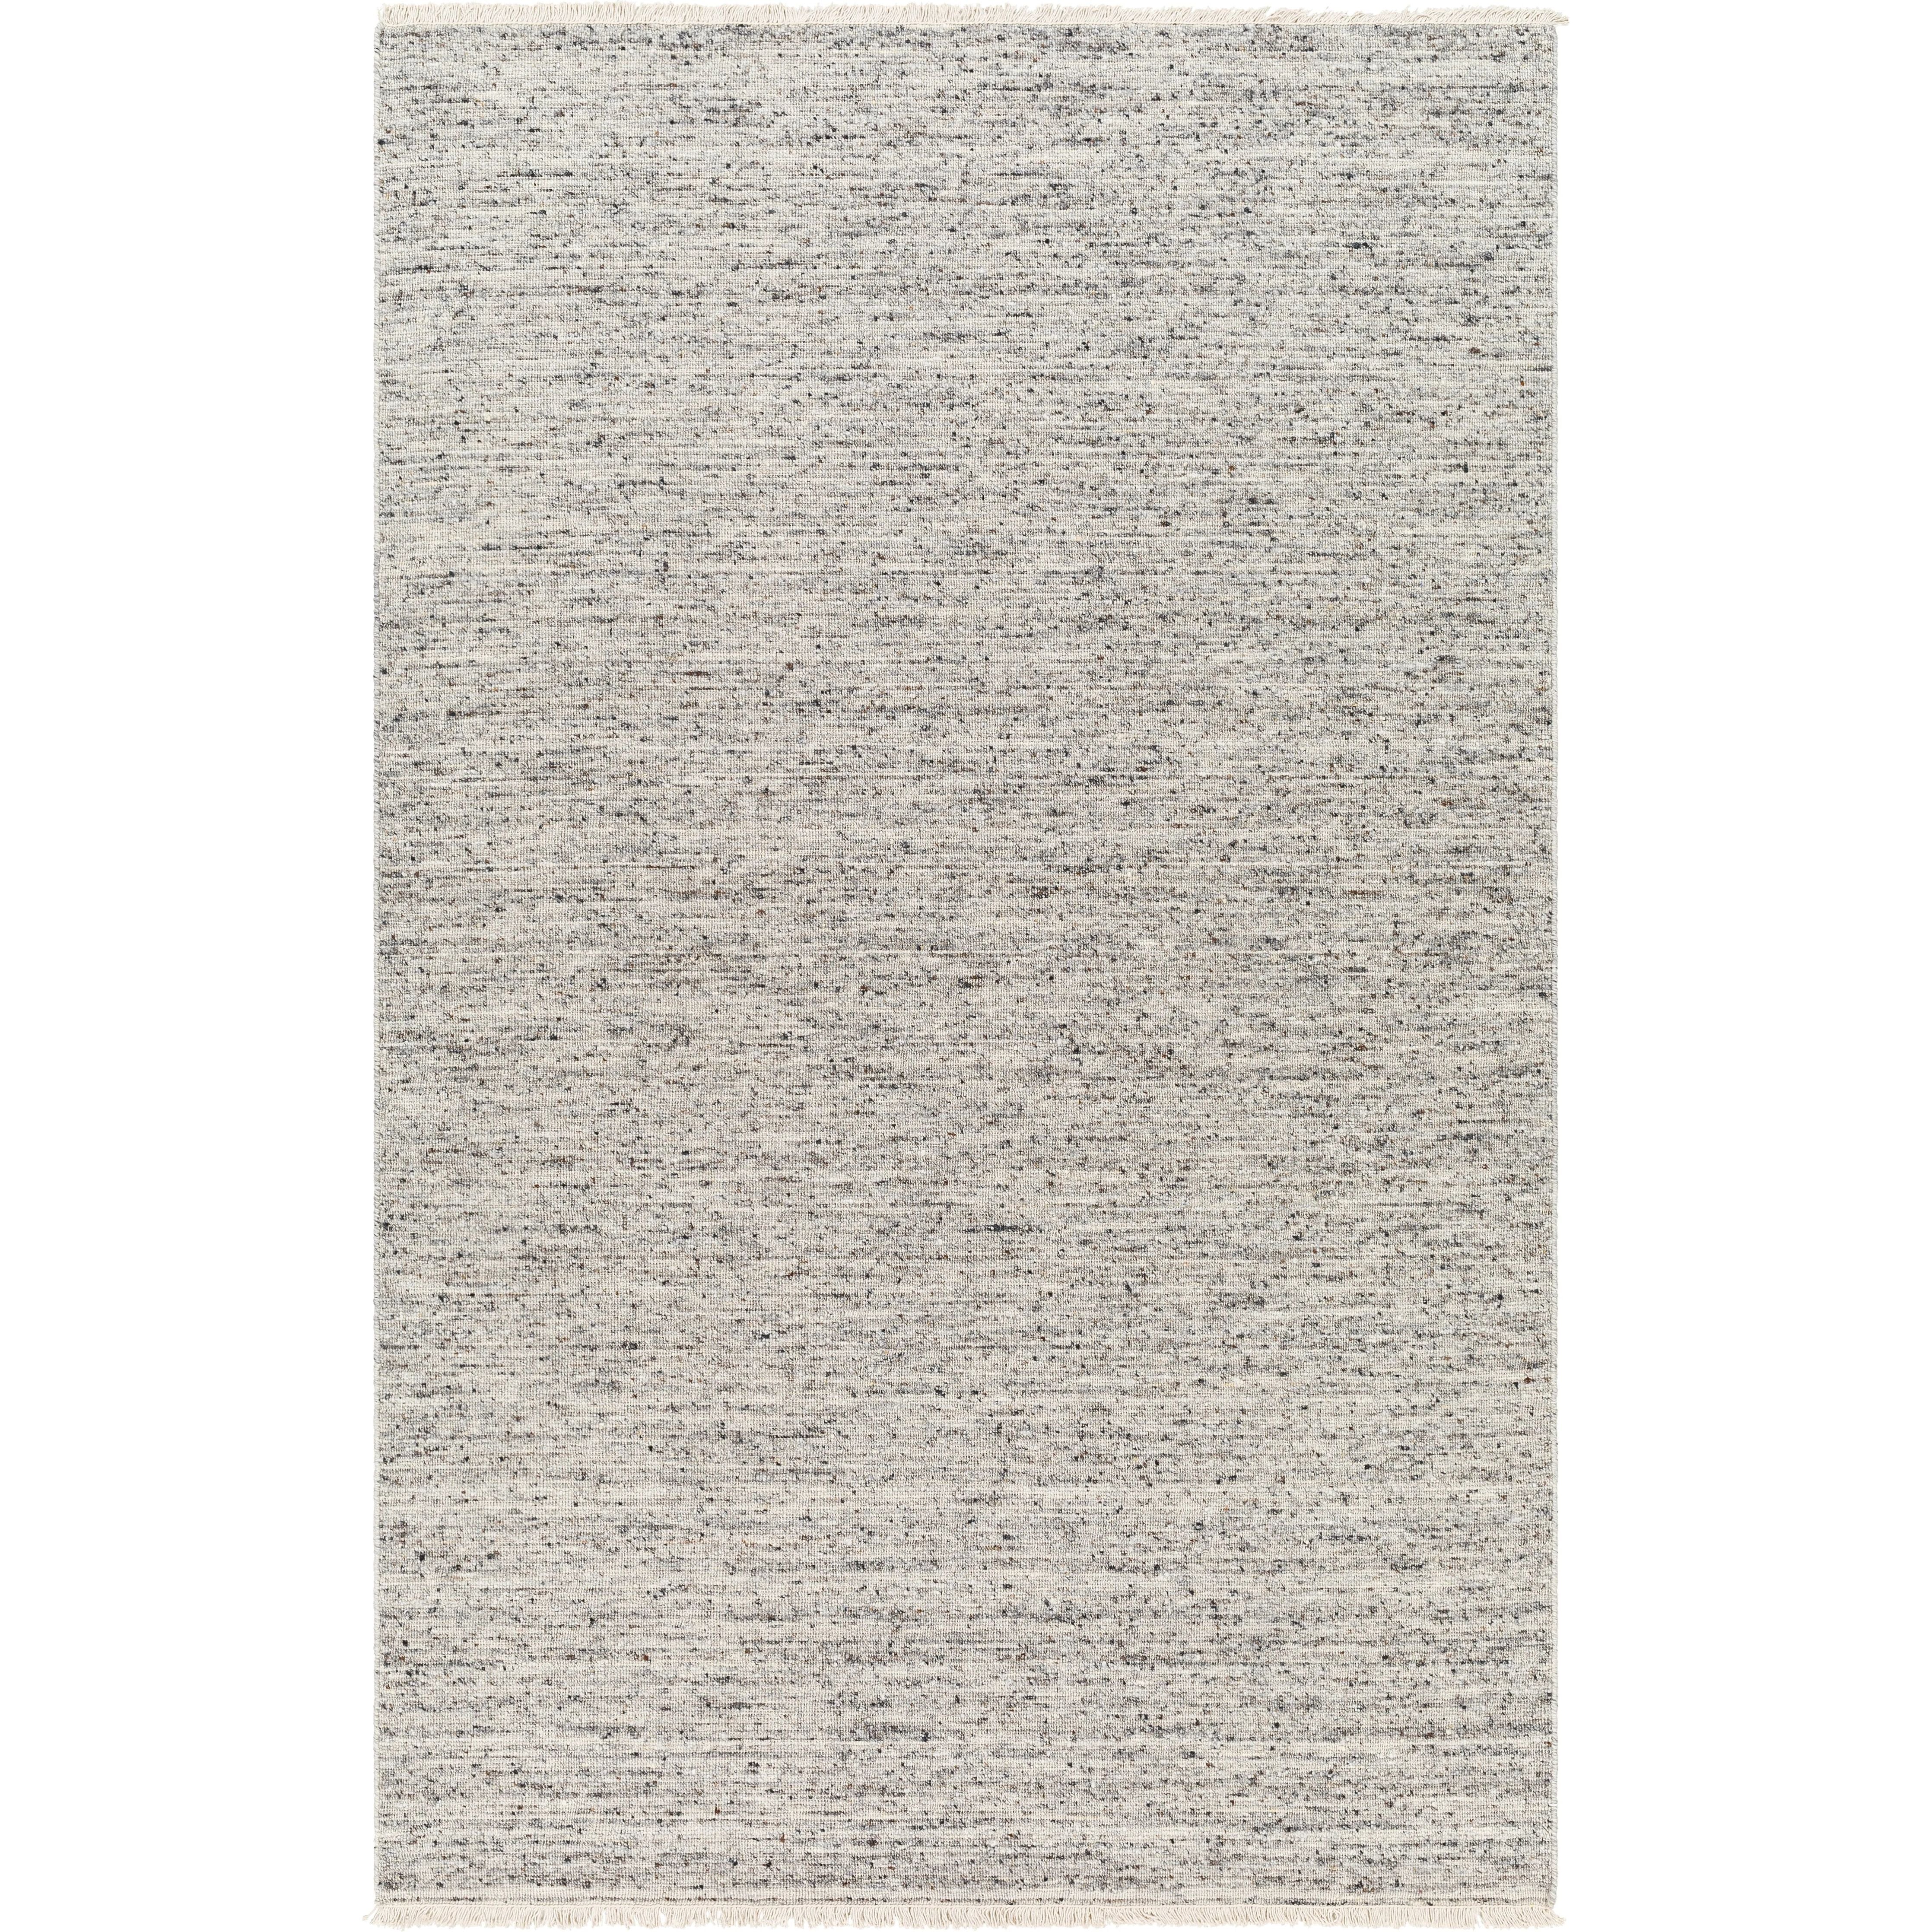 The simplistic yet compelling rugs from the Hamburg Collection effortlessly serve as the exemplar representation of modern decor. These Hand Loomed pieces are exquisitely crafted and offer natural class and grace to your decor space. Made with Wool in India, and has Low Pile. Spot Clean Only, One Year Limited Warranty.Hand Loome Amethyst Home provides interior design, new home construction design consulting, vintage area rugs, and lighting in the Los Angeles metro area.